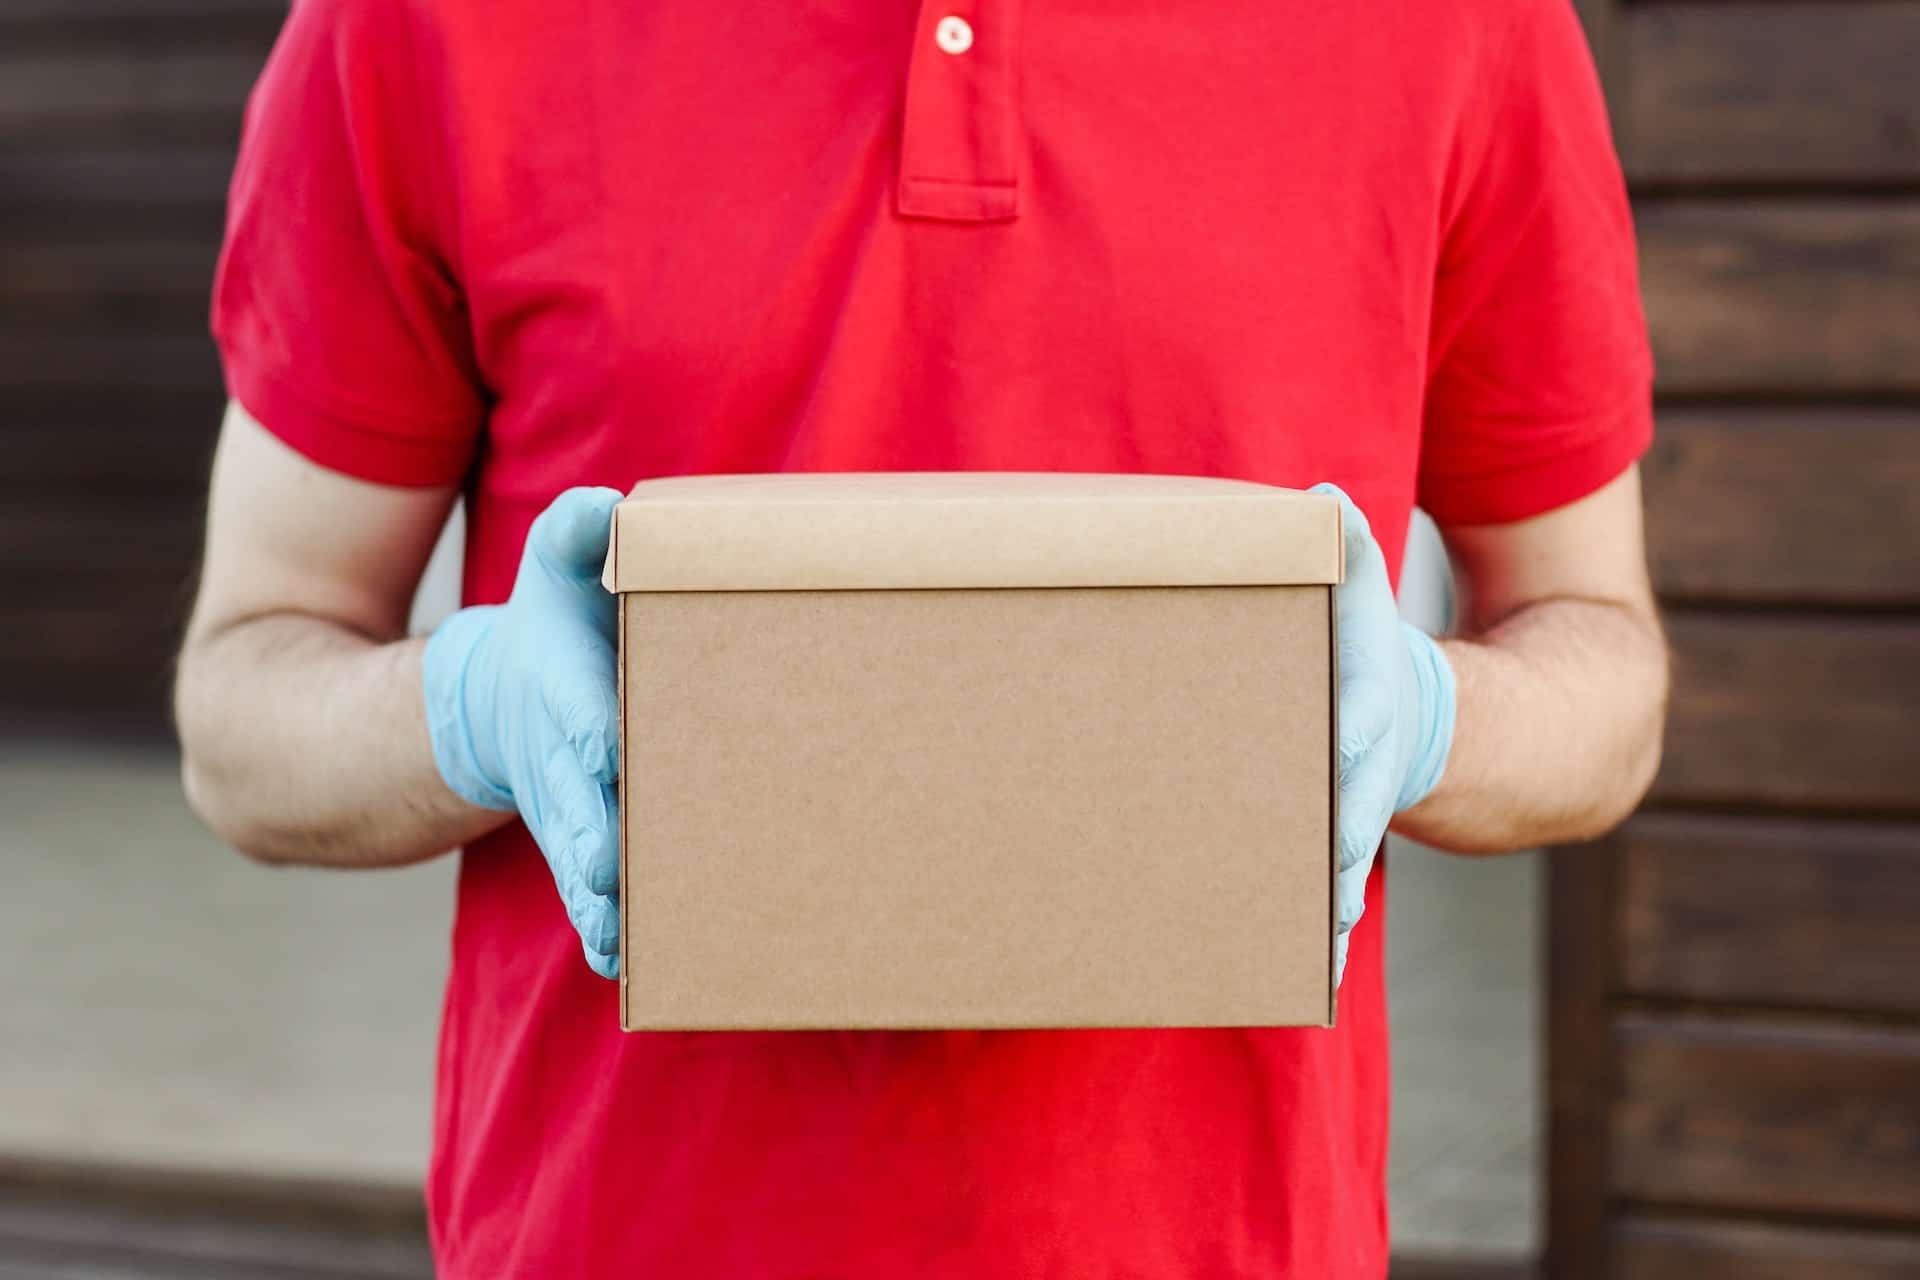 What are Premium Fulfillment Services that help?